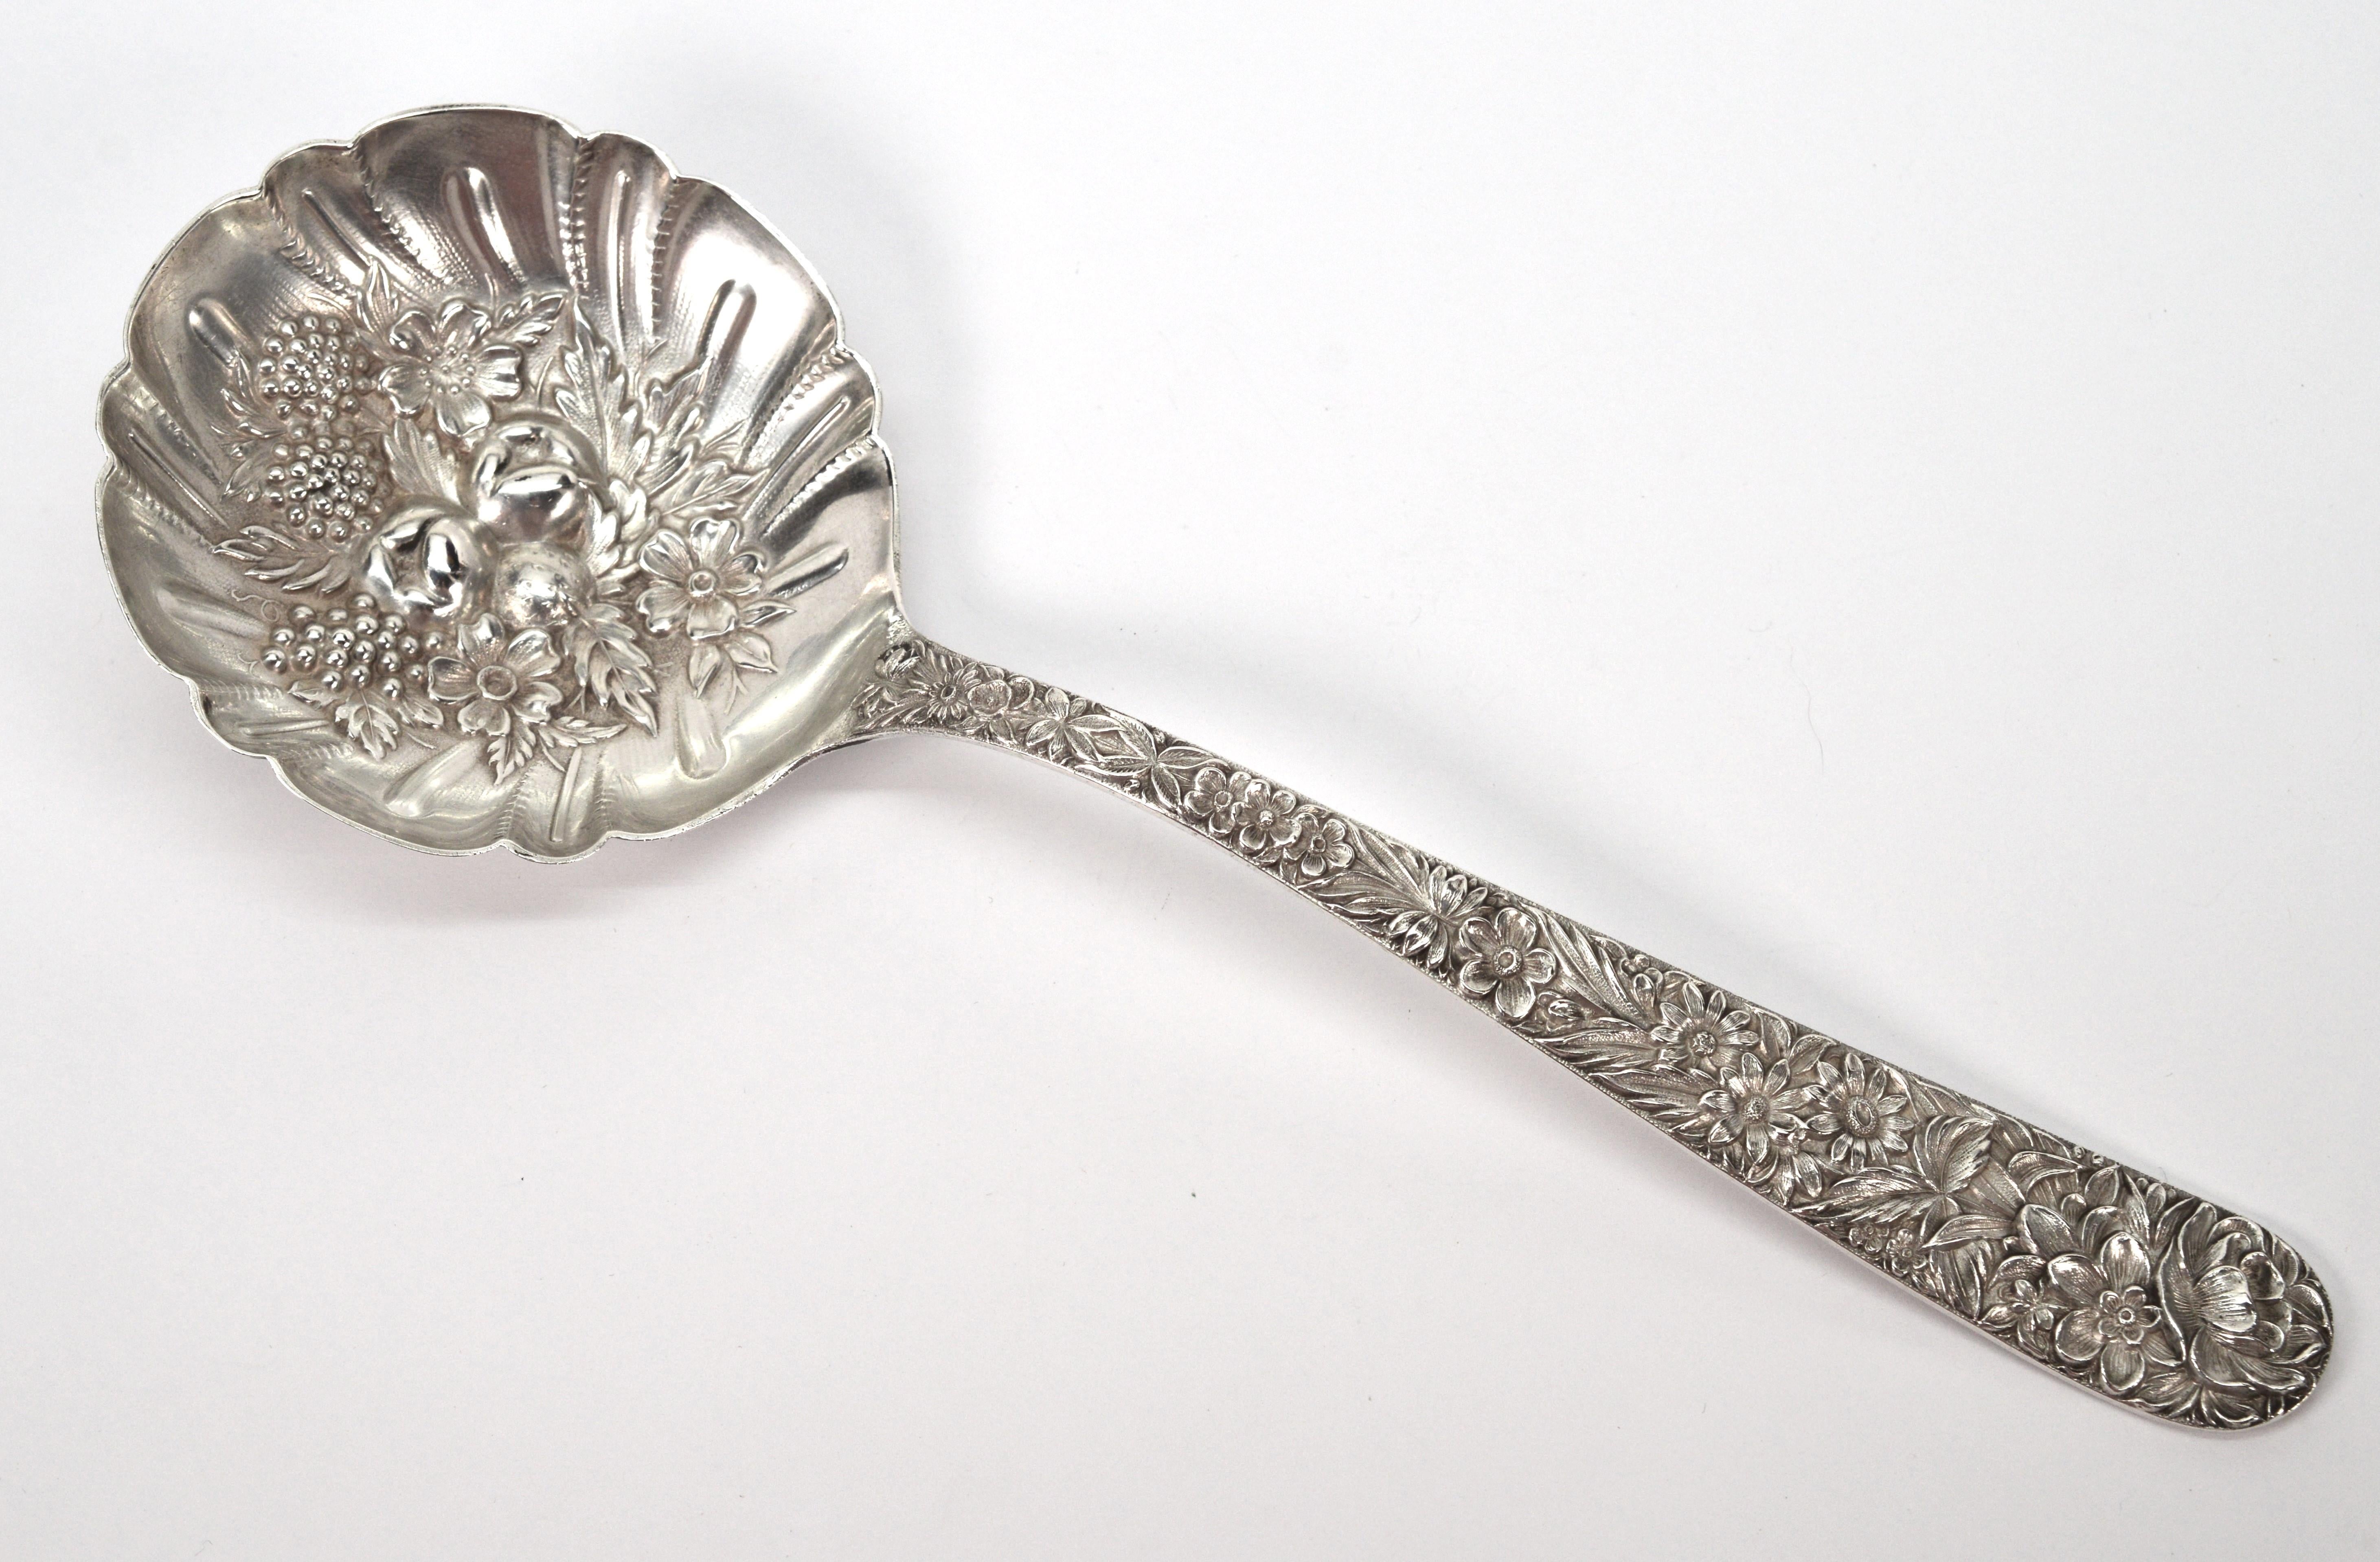 By S. Kirk & Sons, circa 1930, add this artful repousse sterling silver fruit compote serving spoon to your fine tableware collection. In excellent condition and polished, this lovely nine inch long sterling silver serving spoon has a three inch